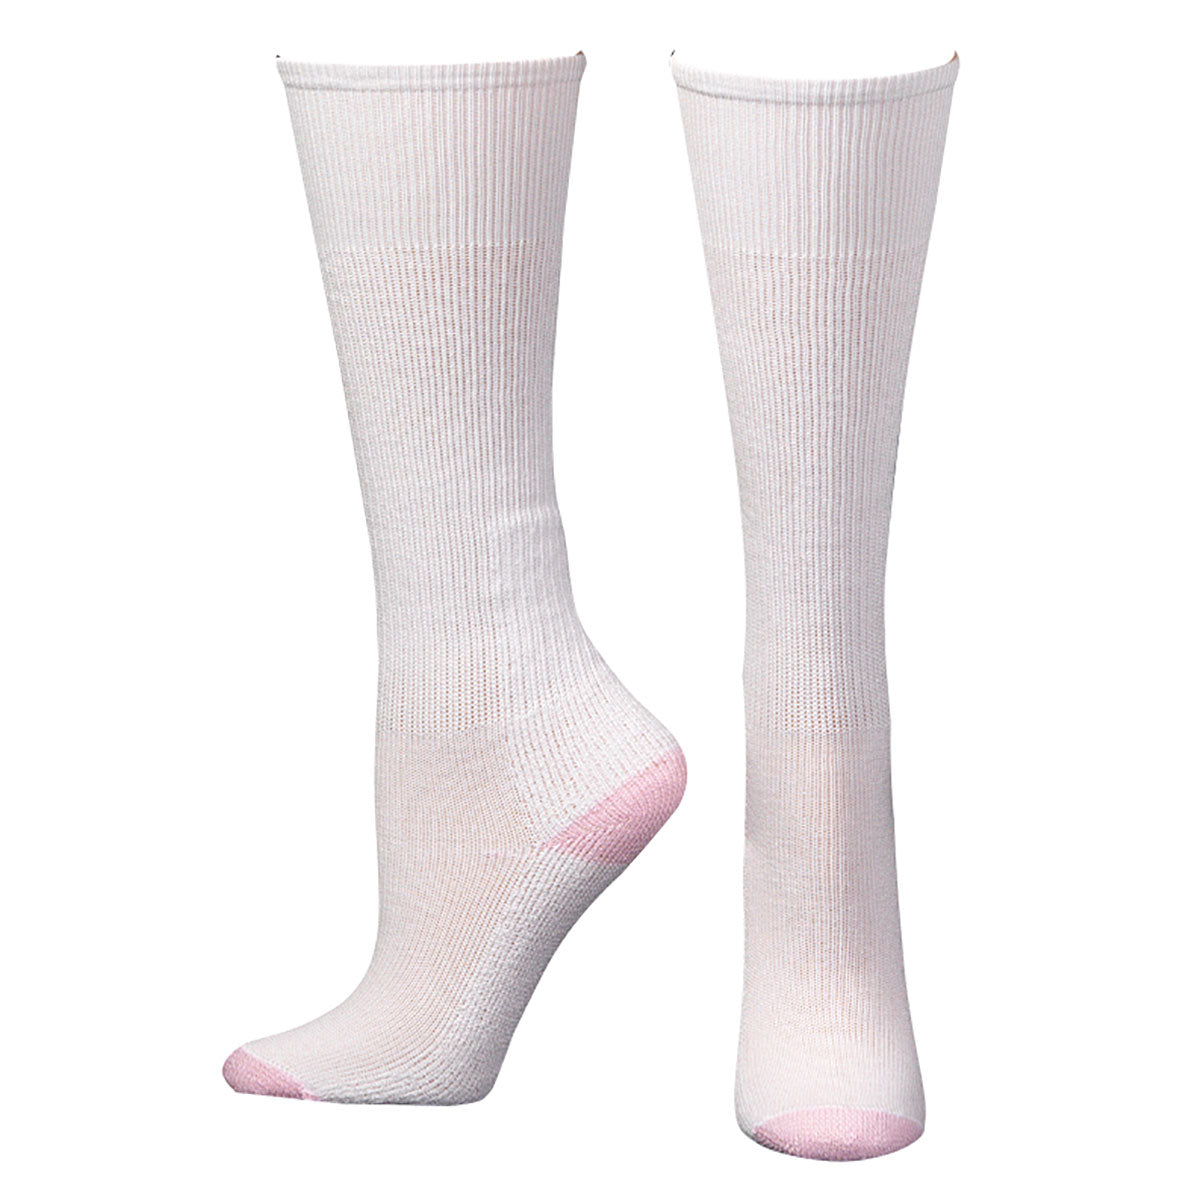 Boot Doctor Ladies Over The Calf Socks 3 Pack